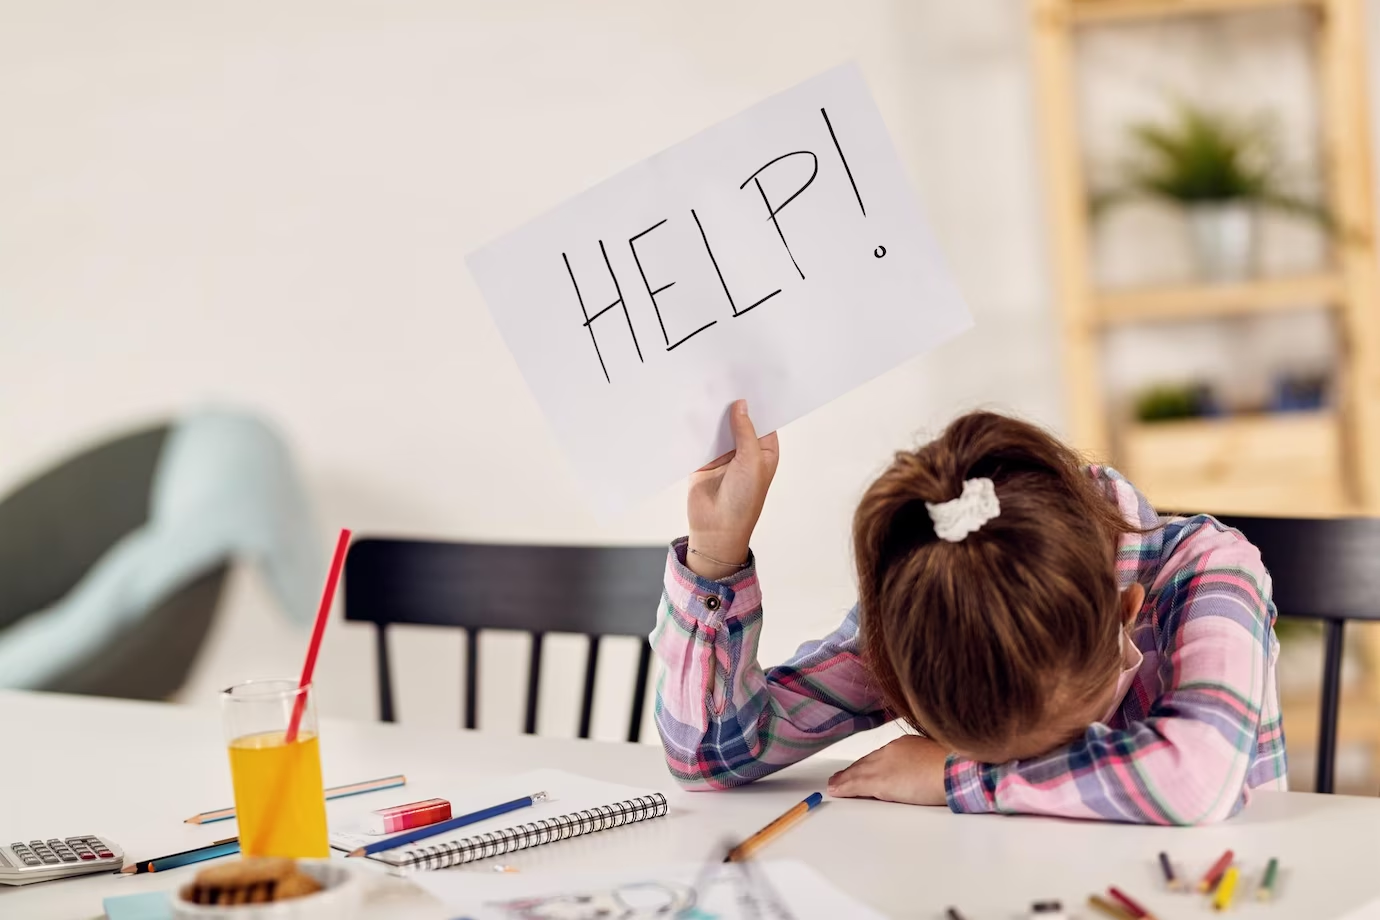 Enthusiastic young student asking for help during homeschooling.